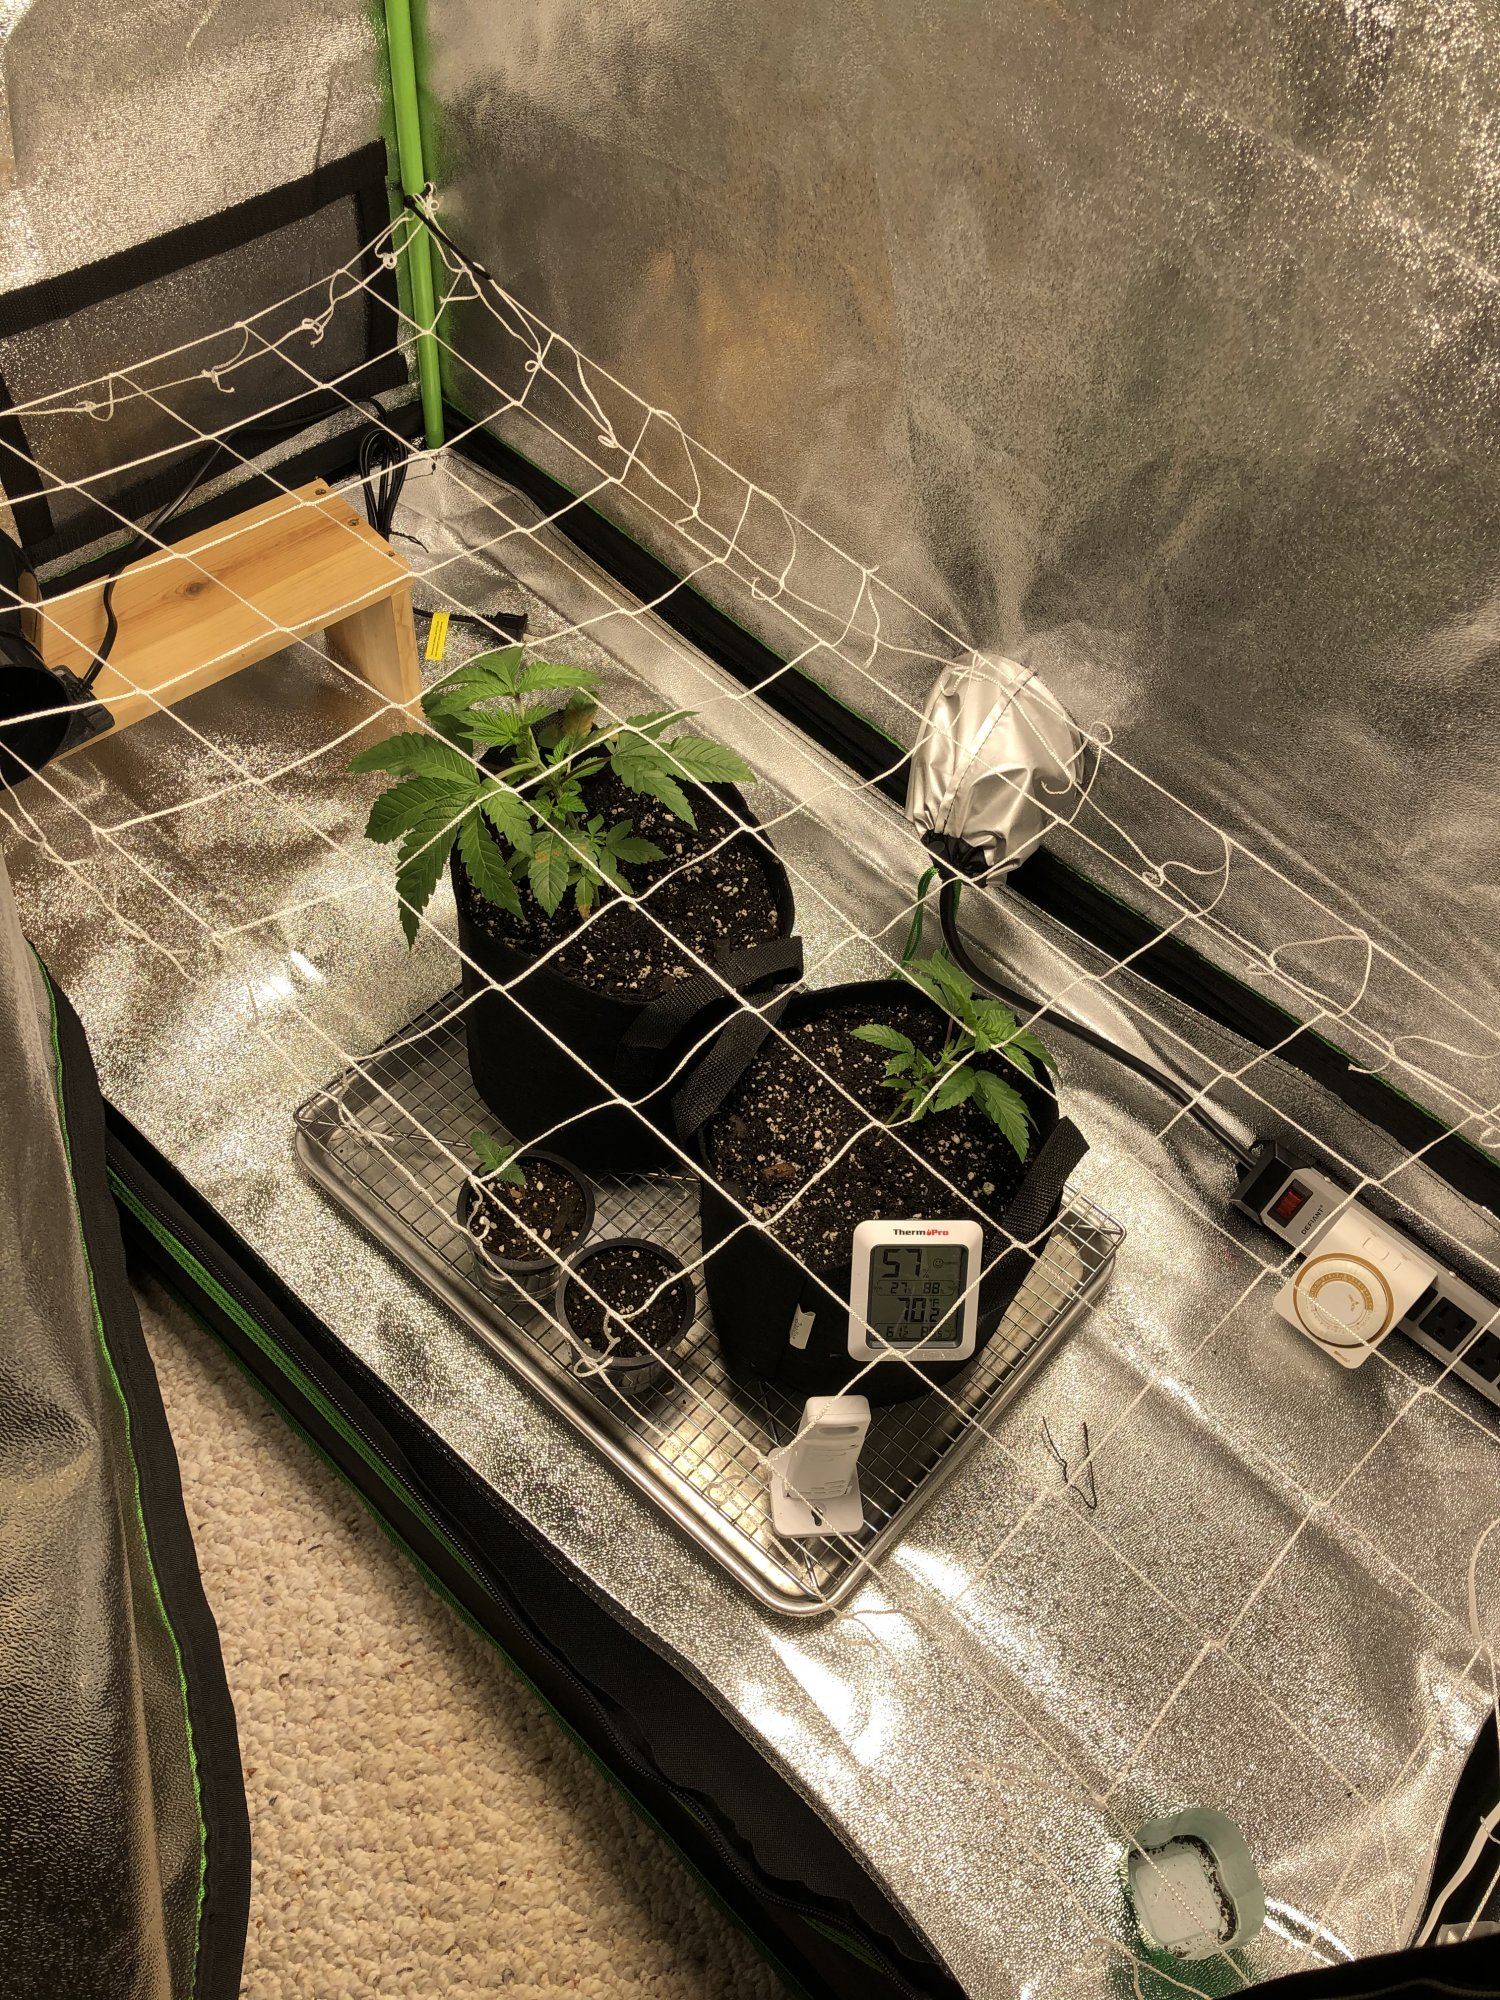 First scrog attempt how much am i fing up